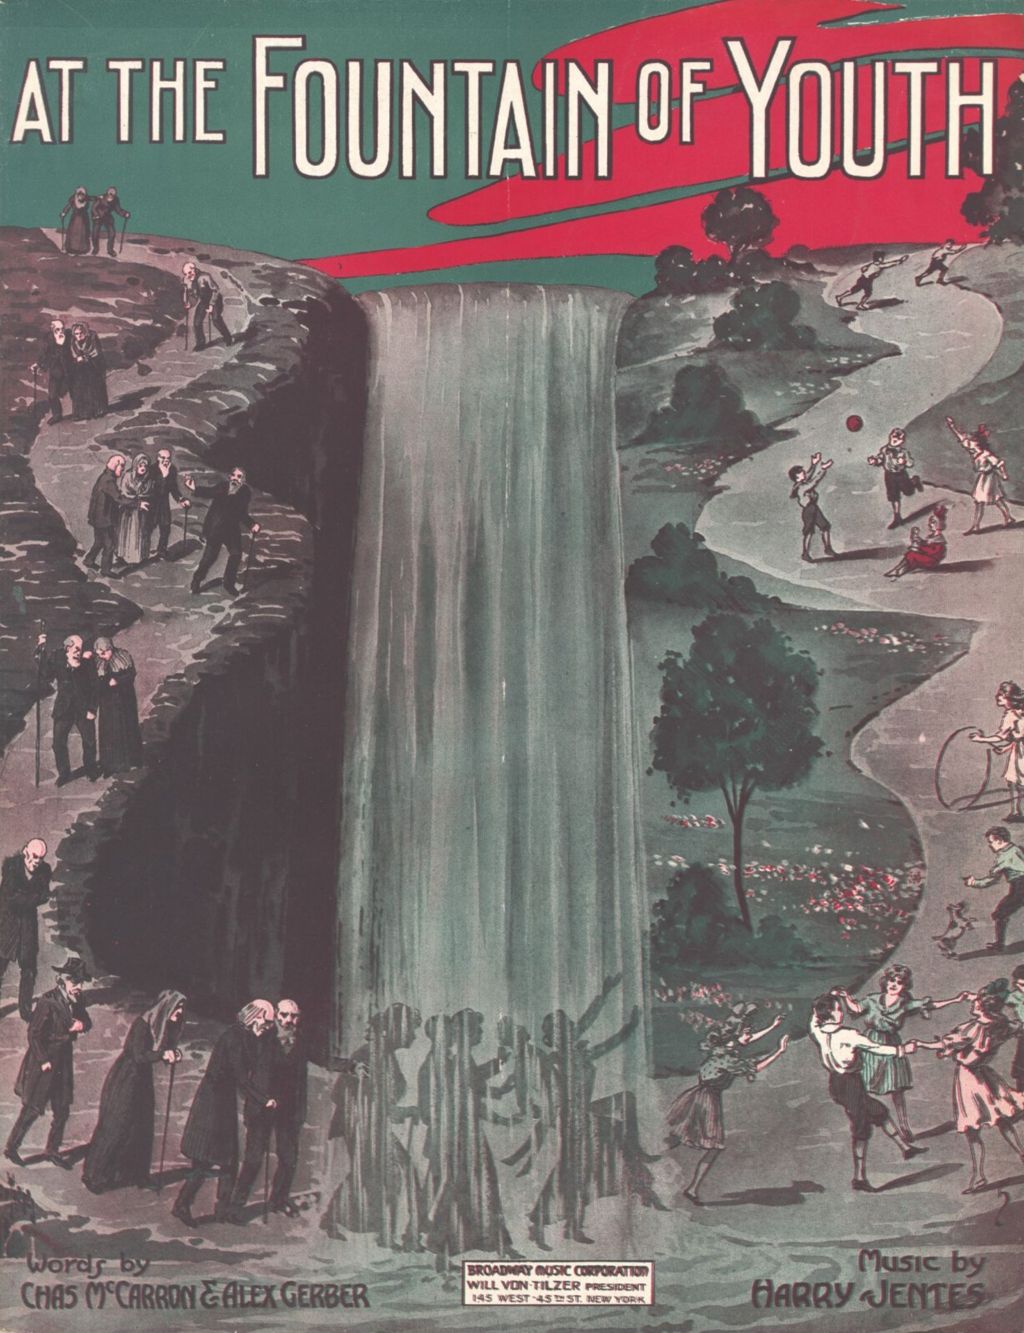 Miniature of At the Fountain of Youth